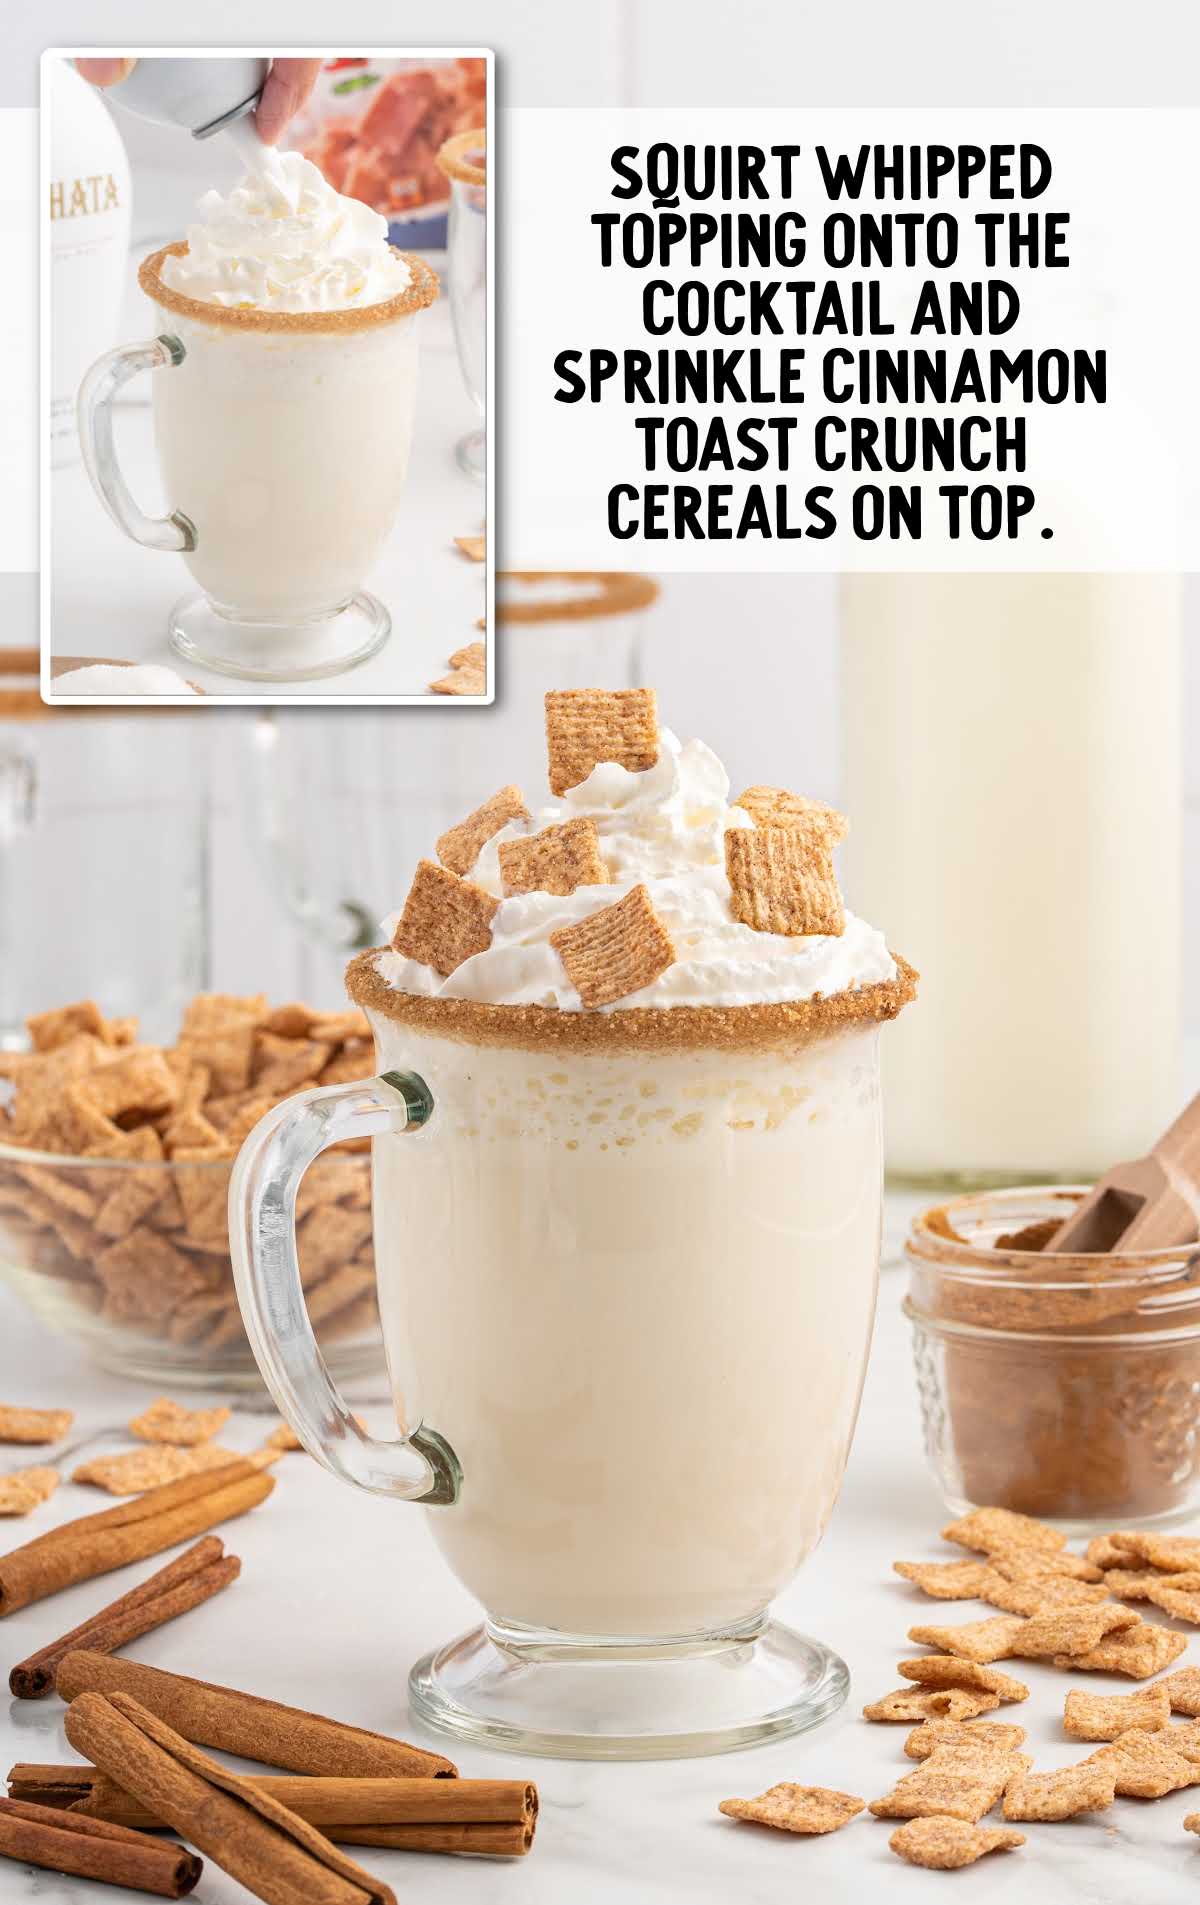 whipped topping squirt onto the cocktail and sprinkled cinnamon toast crunch cereal